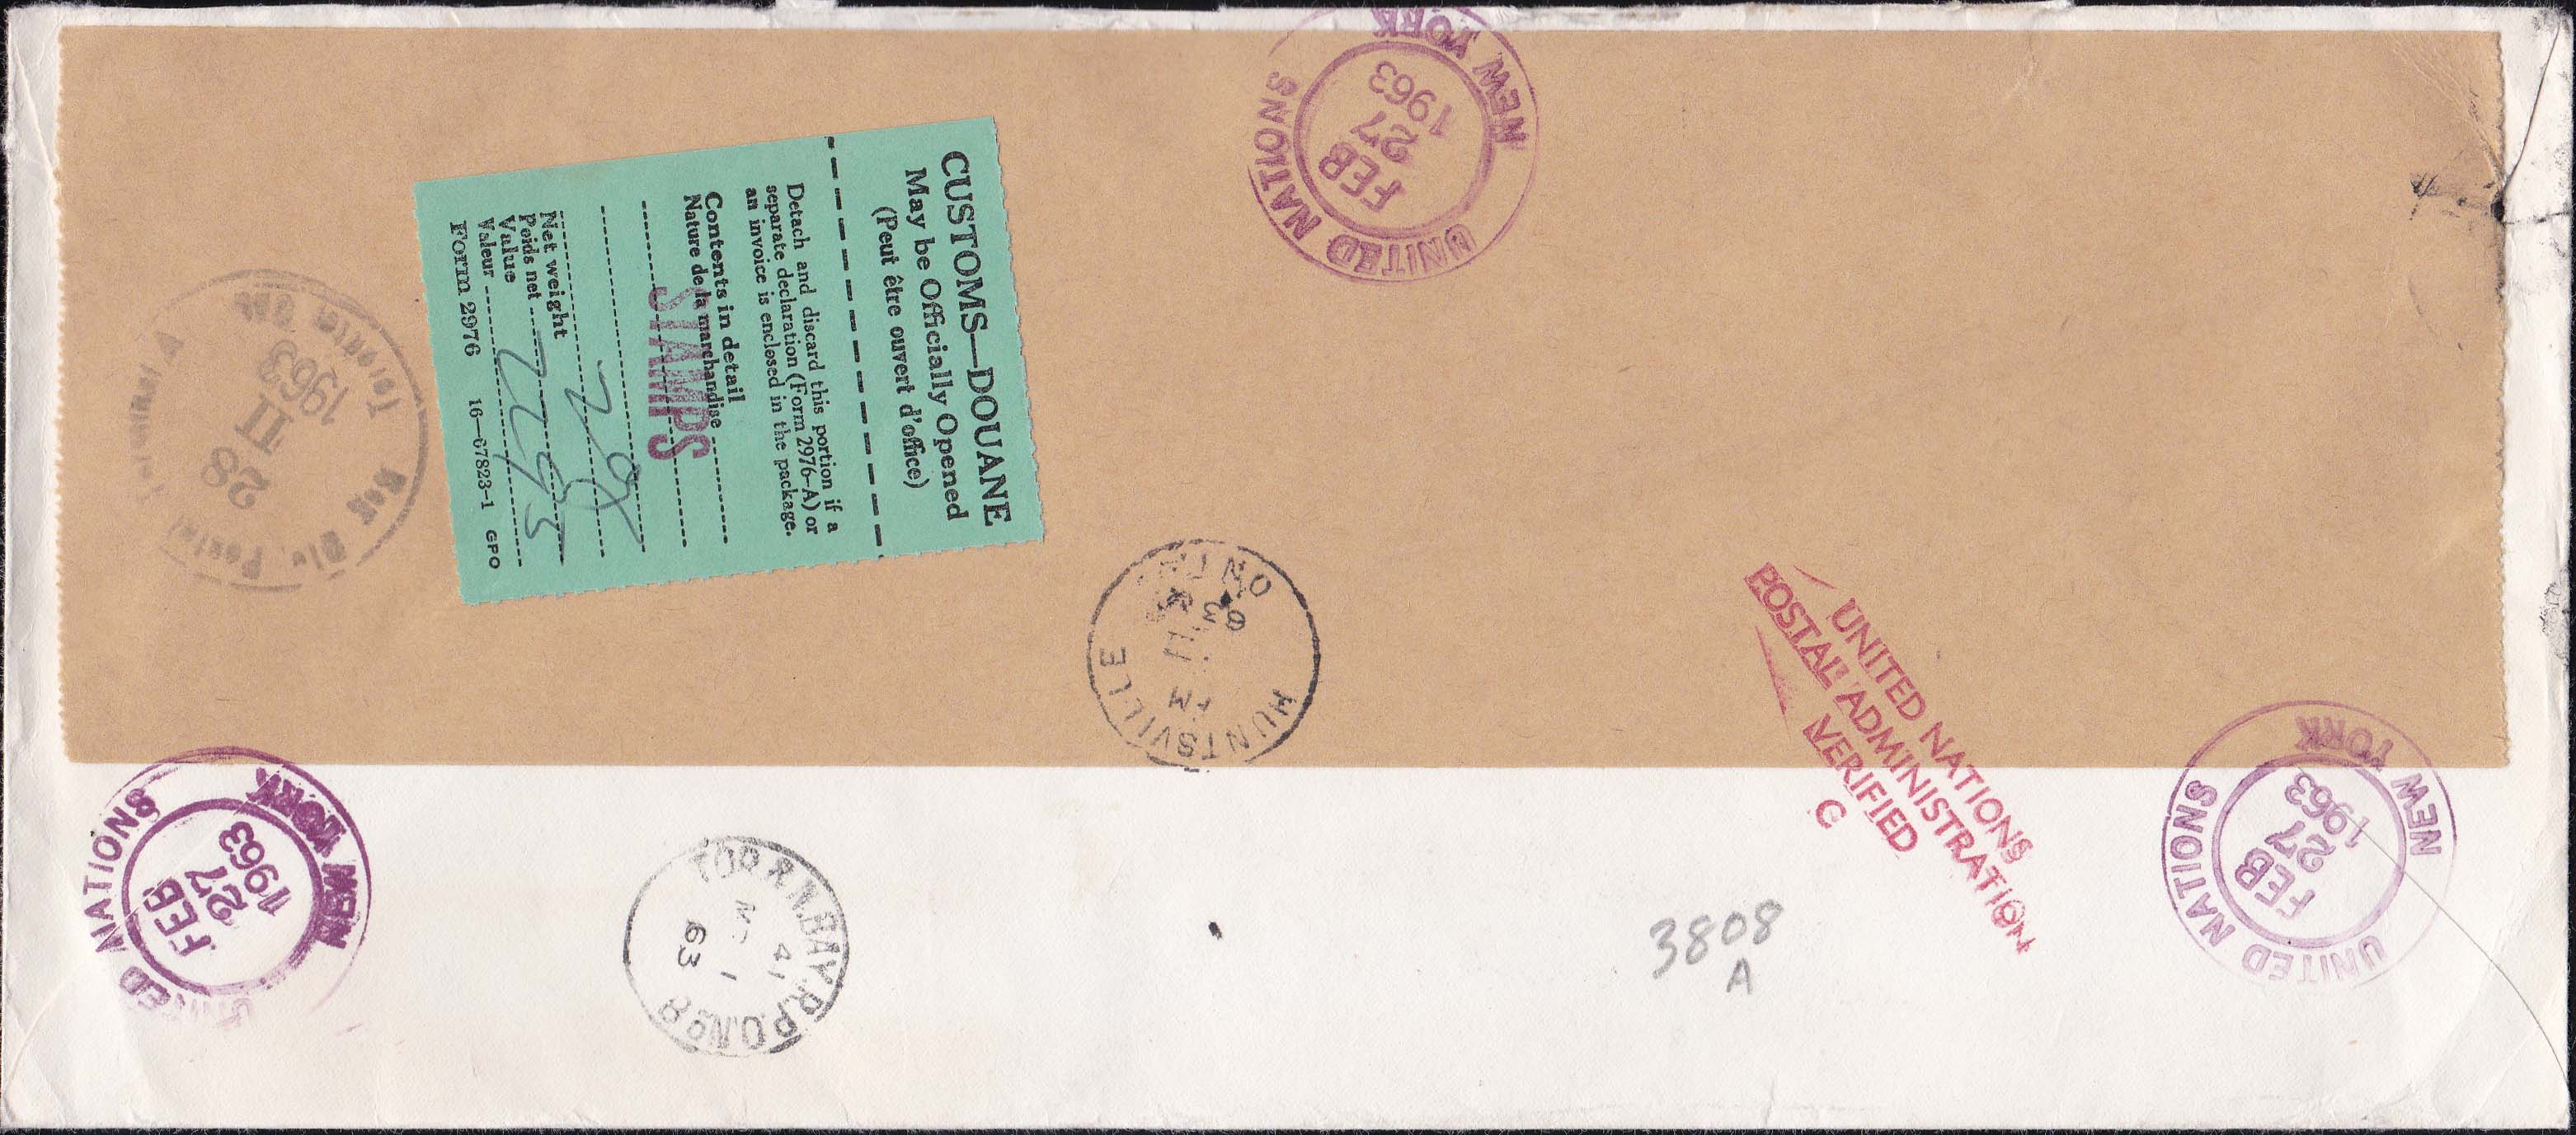 United Nations Scott 102-103 Feb 27, 1963 Registered Cover to Canada - Back